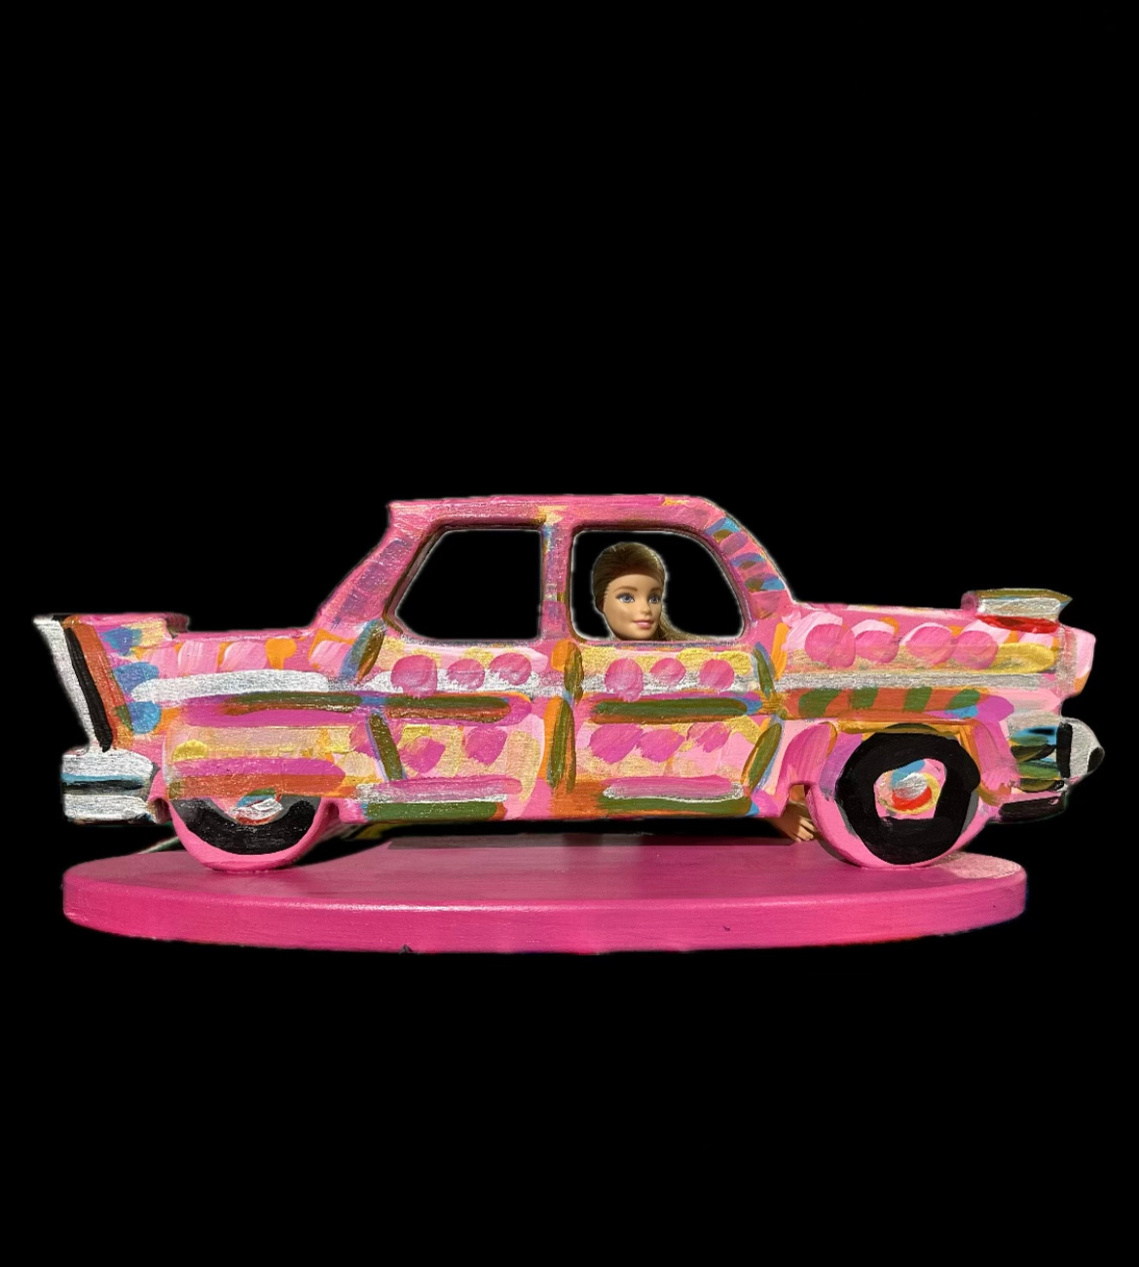 Frank Romero Pink Car Sculpture. Art available for purchase. Eastern Projects Gallery Los Angeles. 